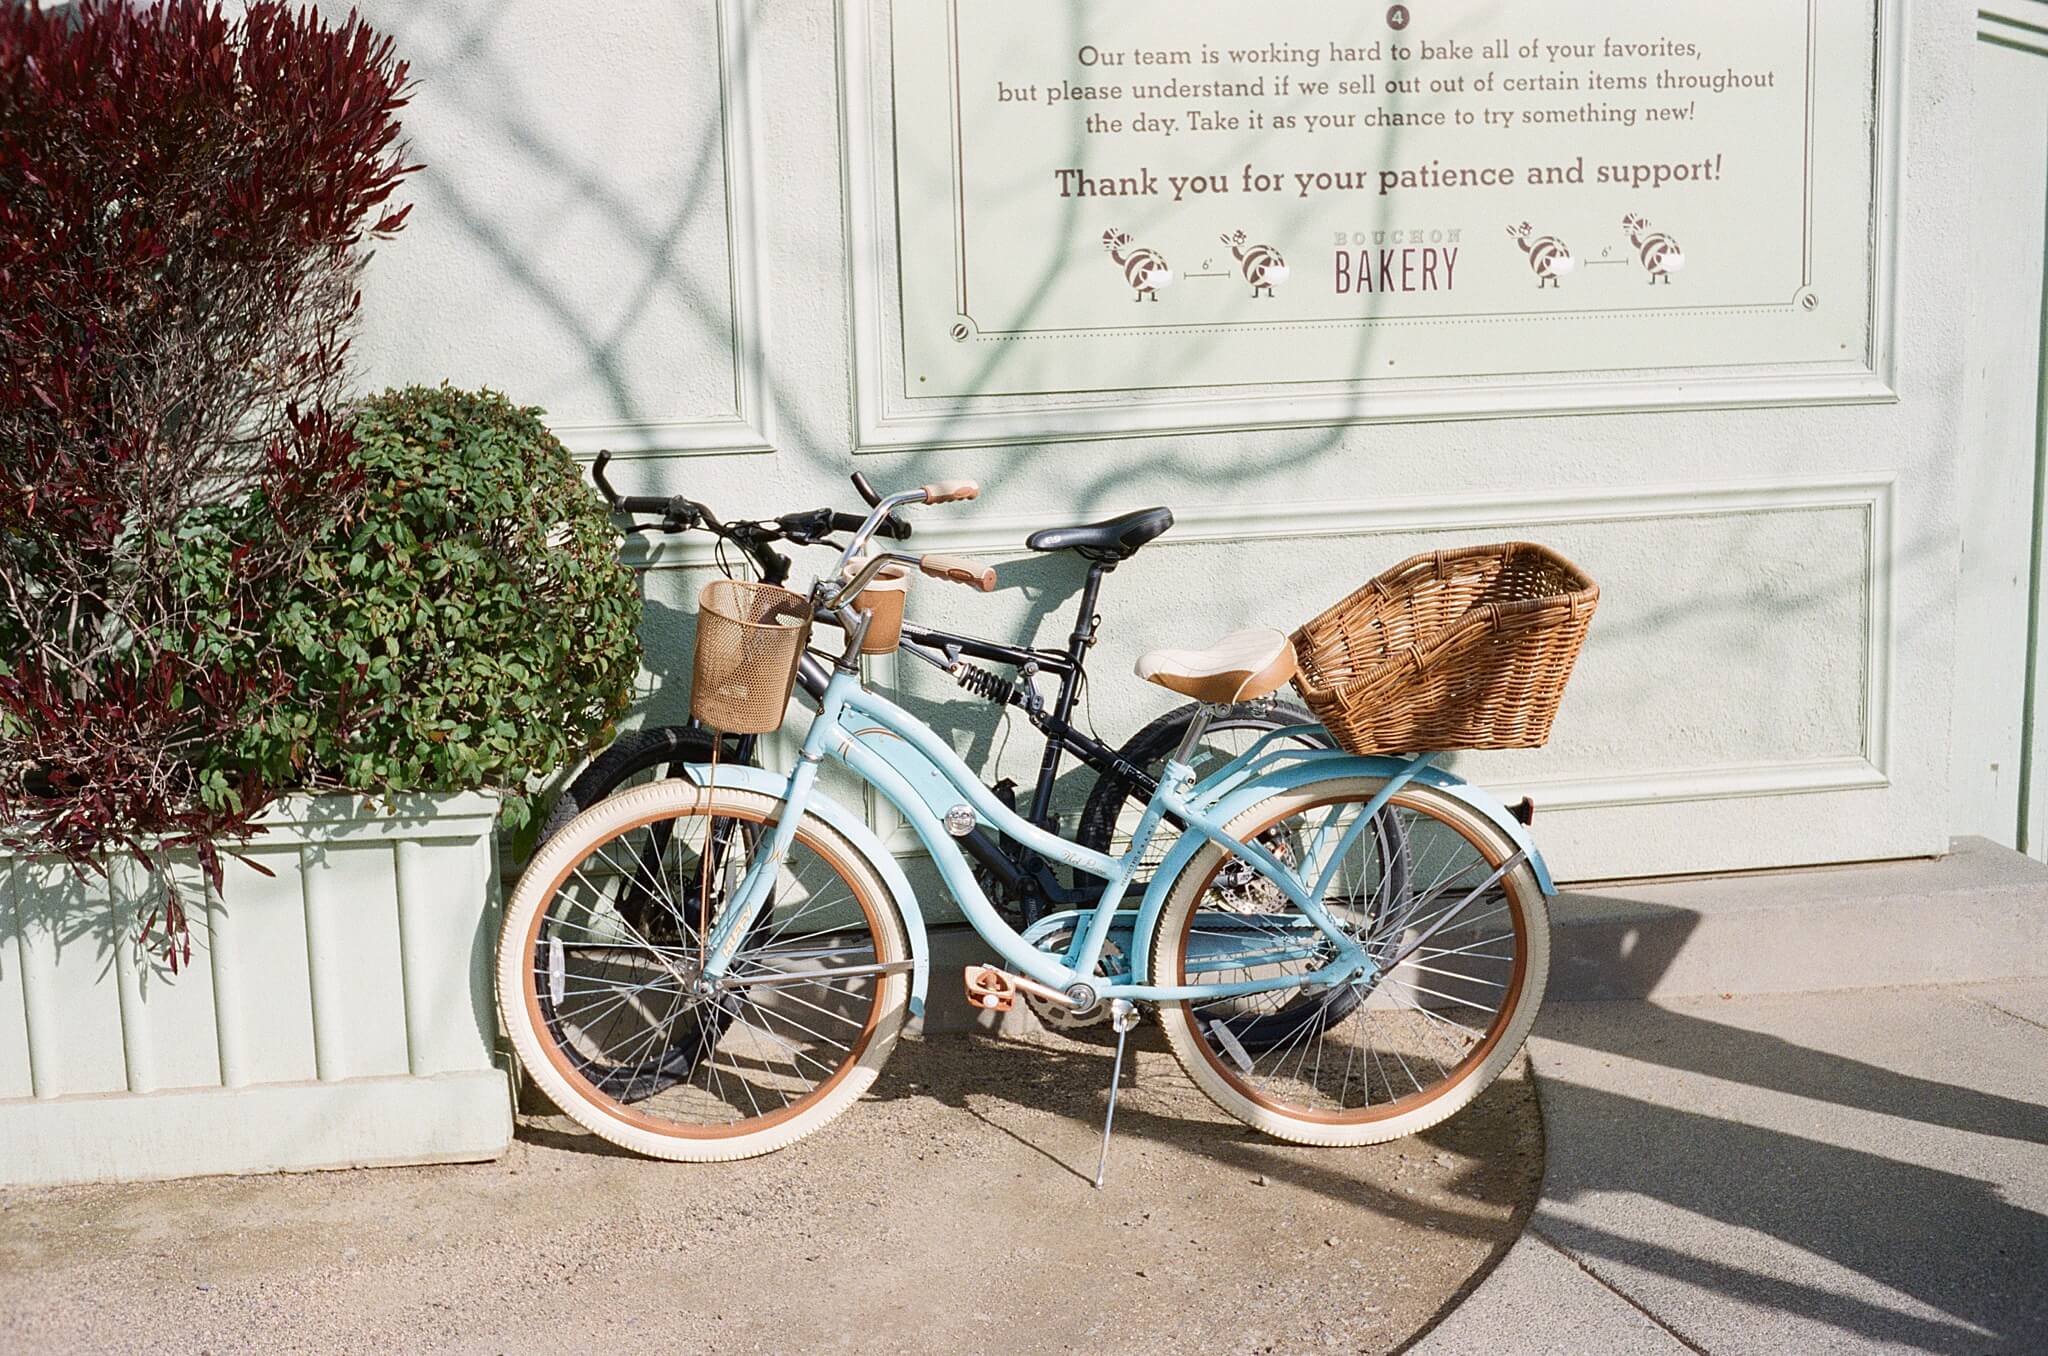 roller 35 sample image. A baby-blue old-fashioned bicycle with wide handle bars and a wooden basket stands propped up in front of a pale green wall next to a topiary. The sun shines, casting shadows behind the bike.